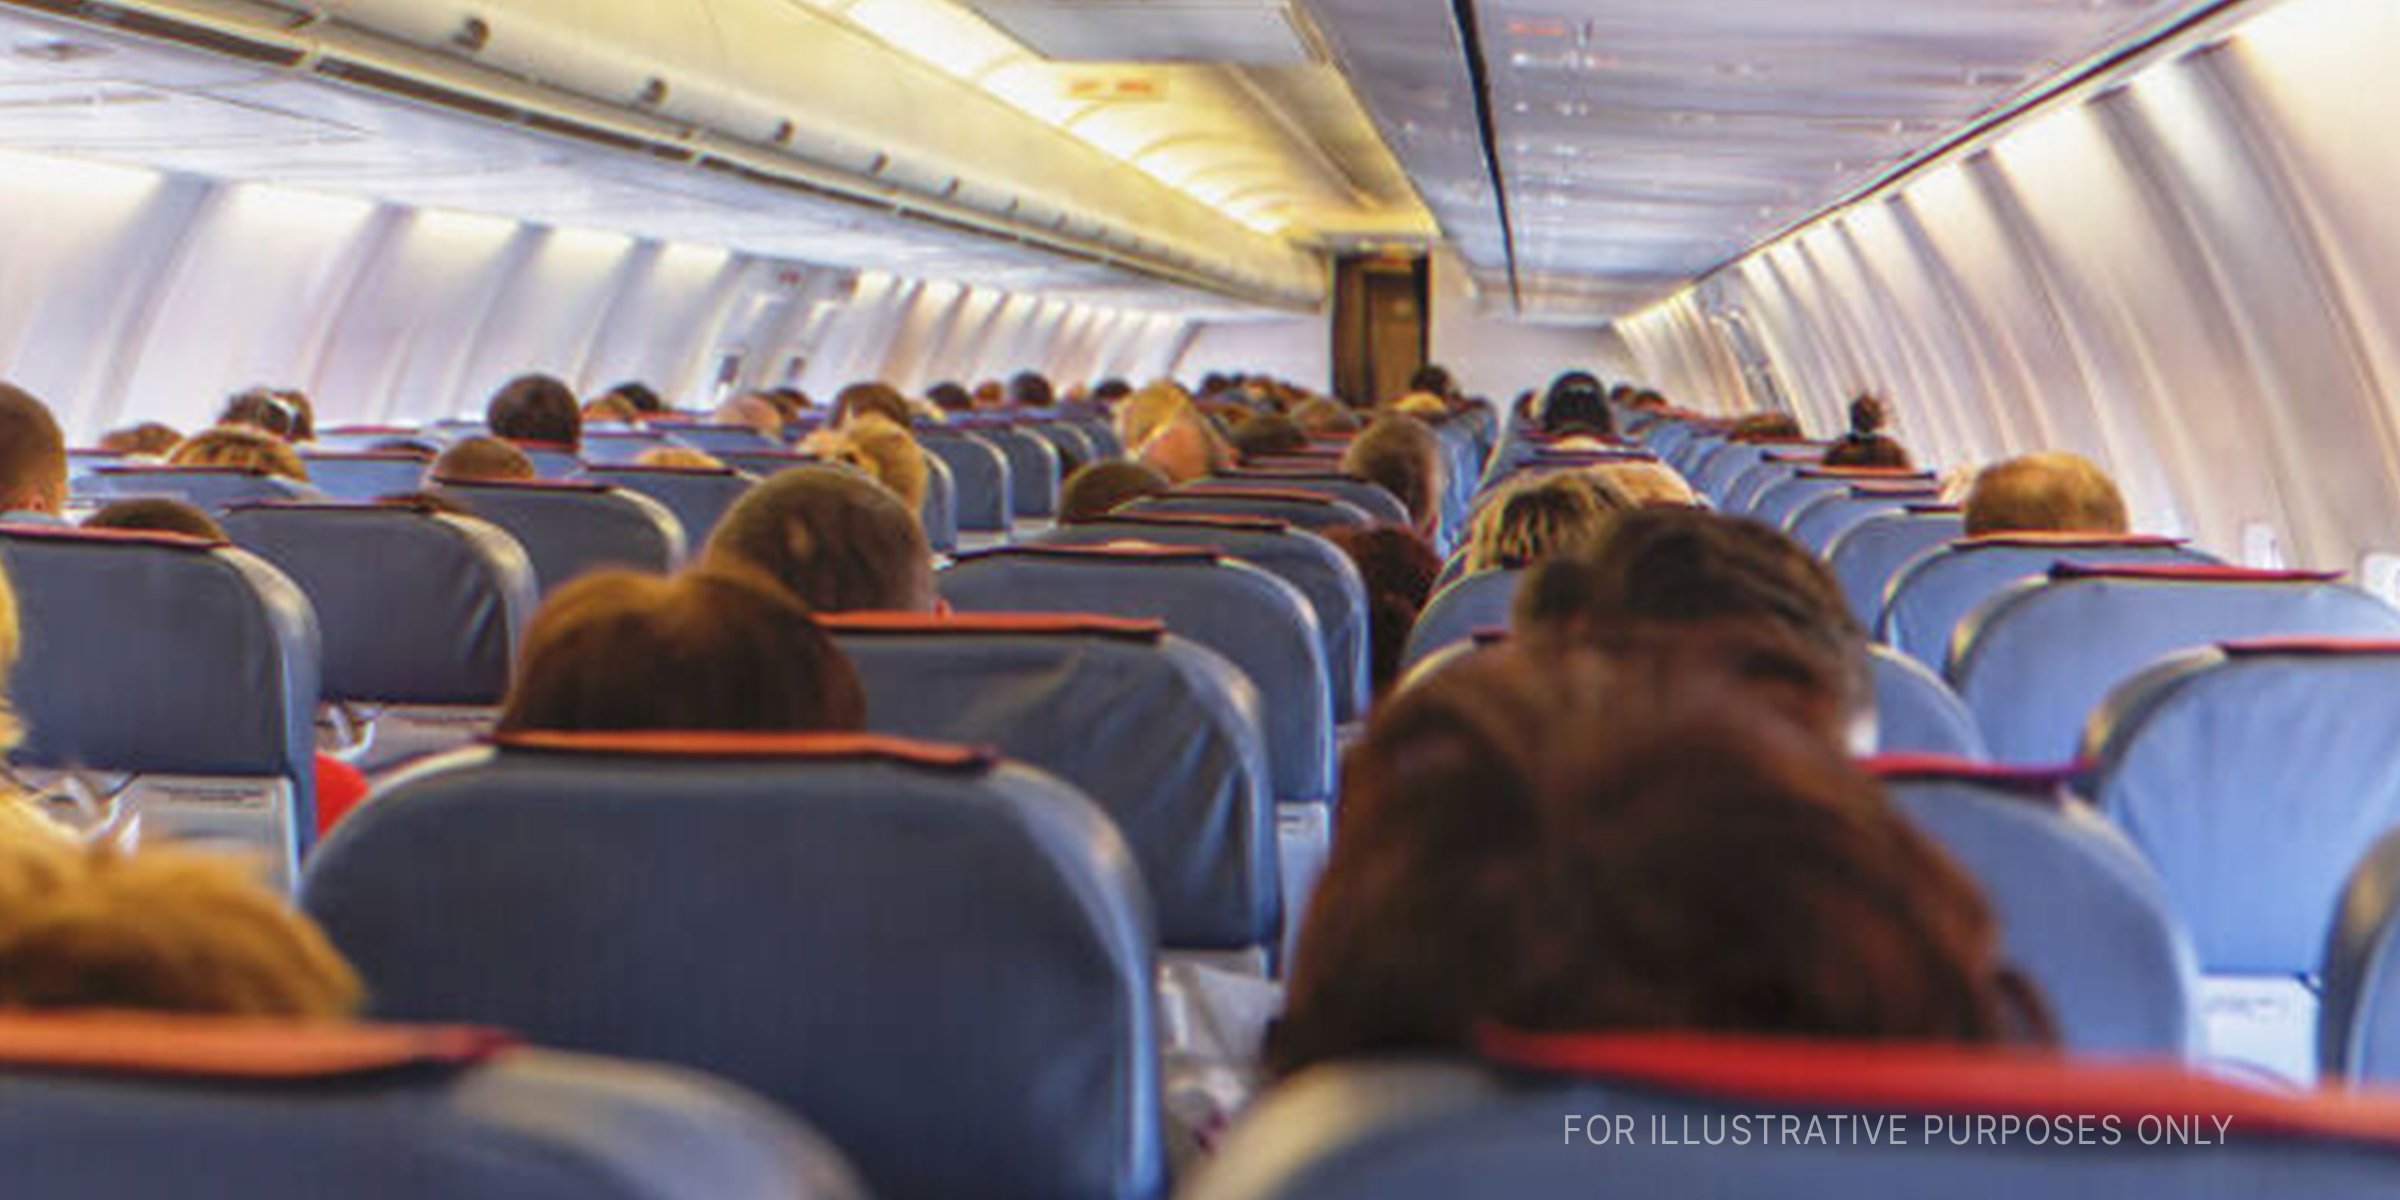 Passengers in an airplane | Source: Getty Images